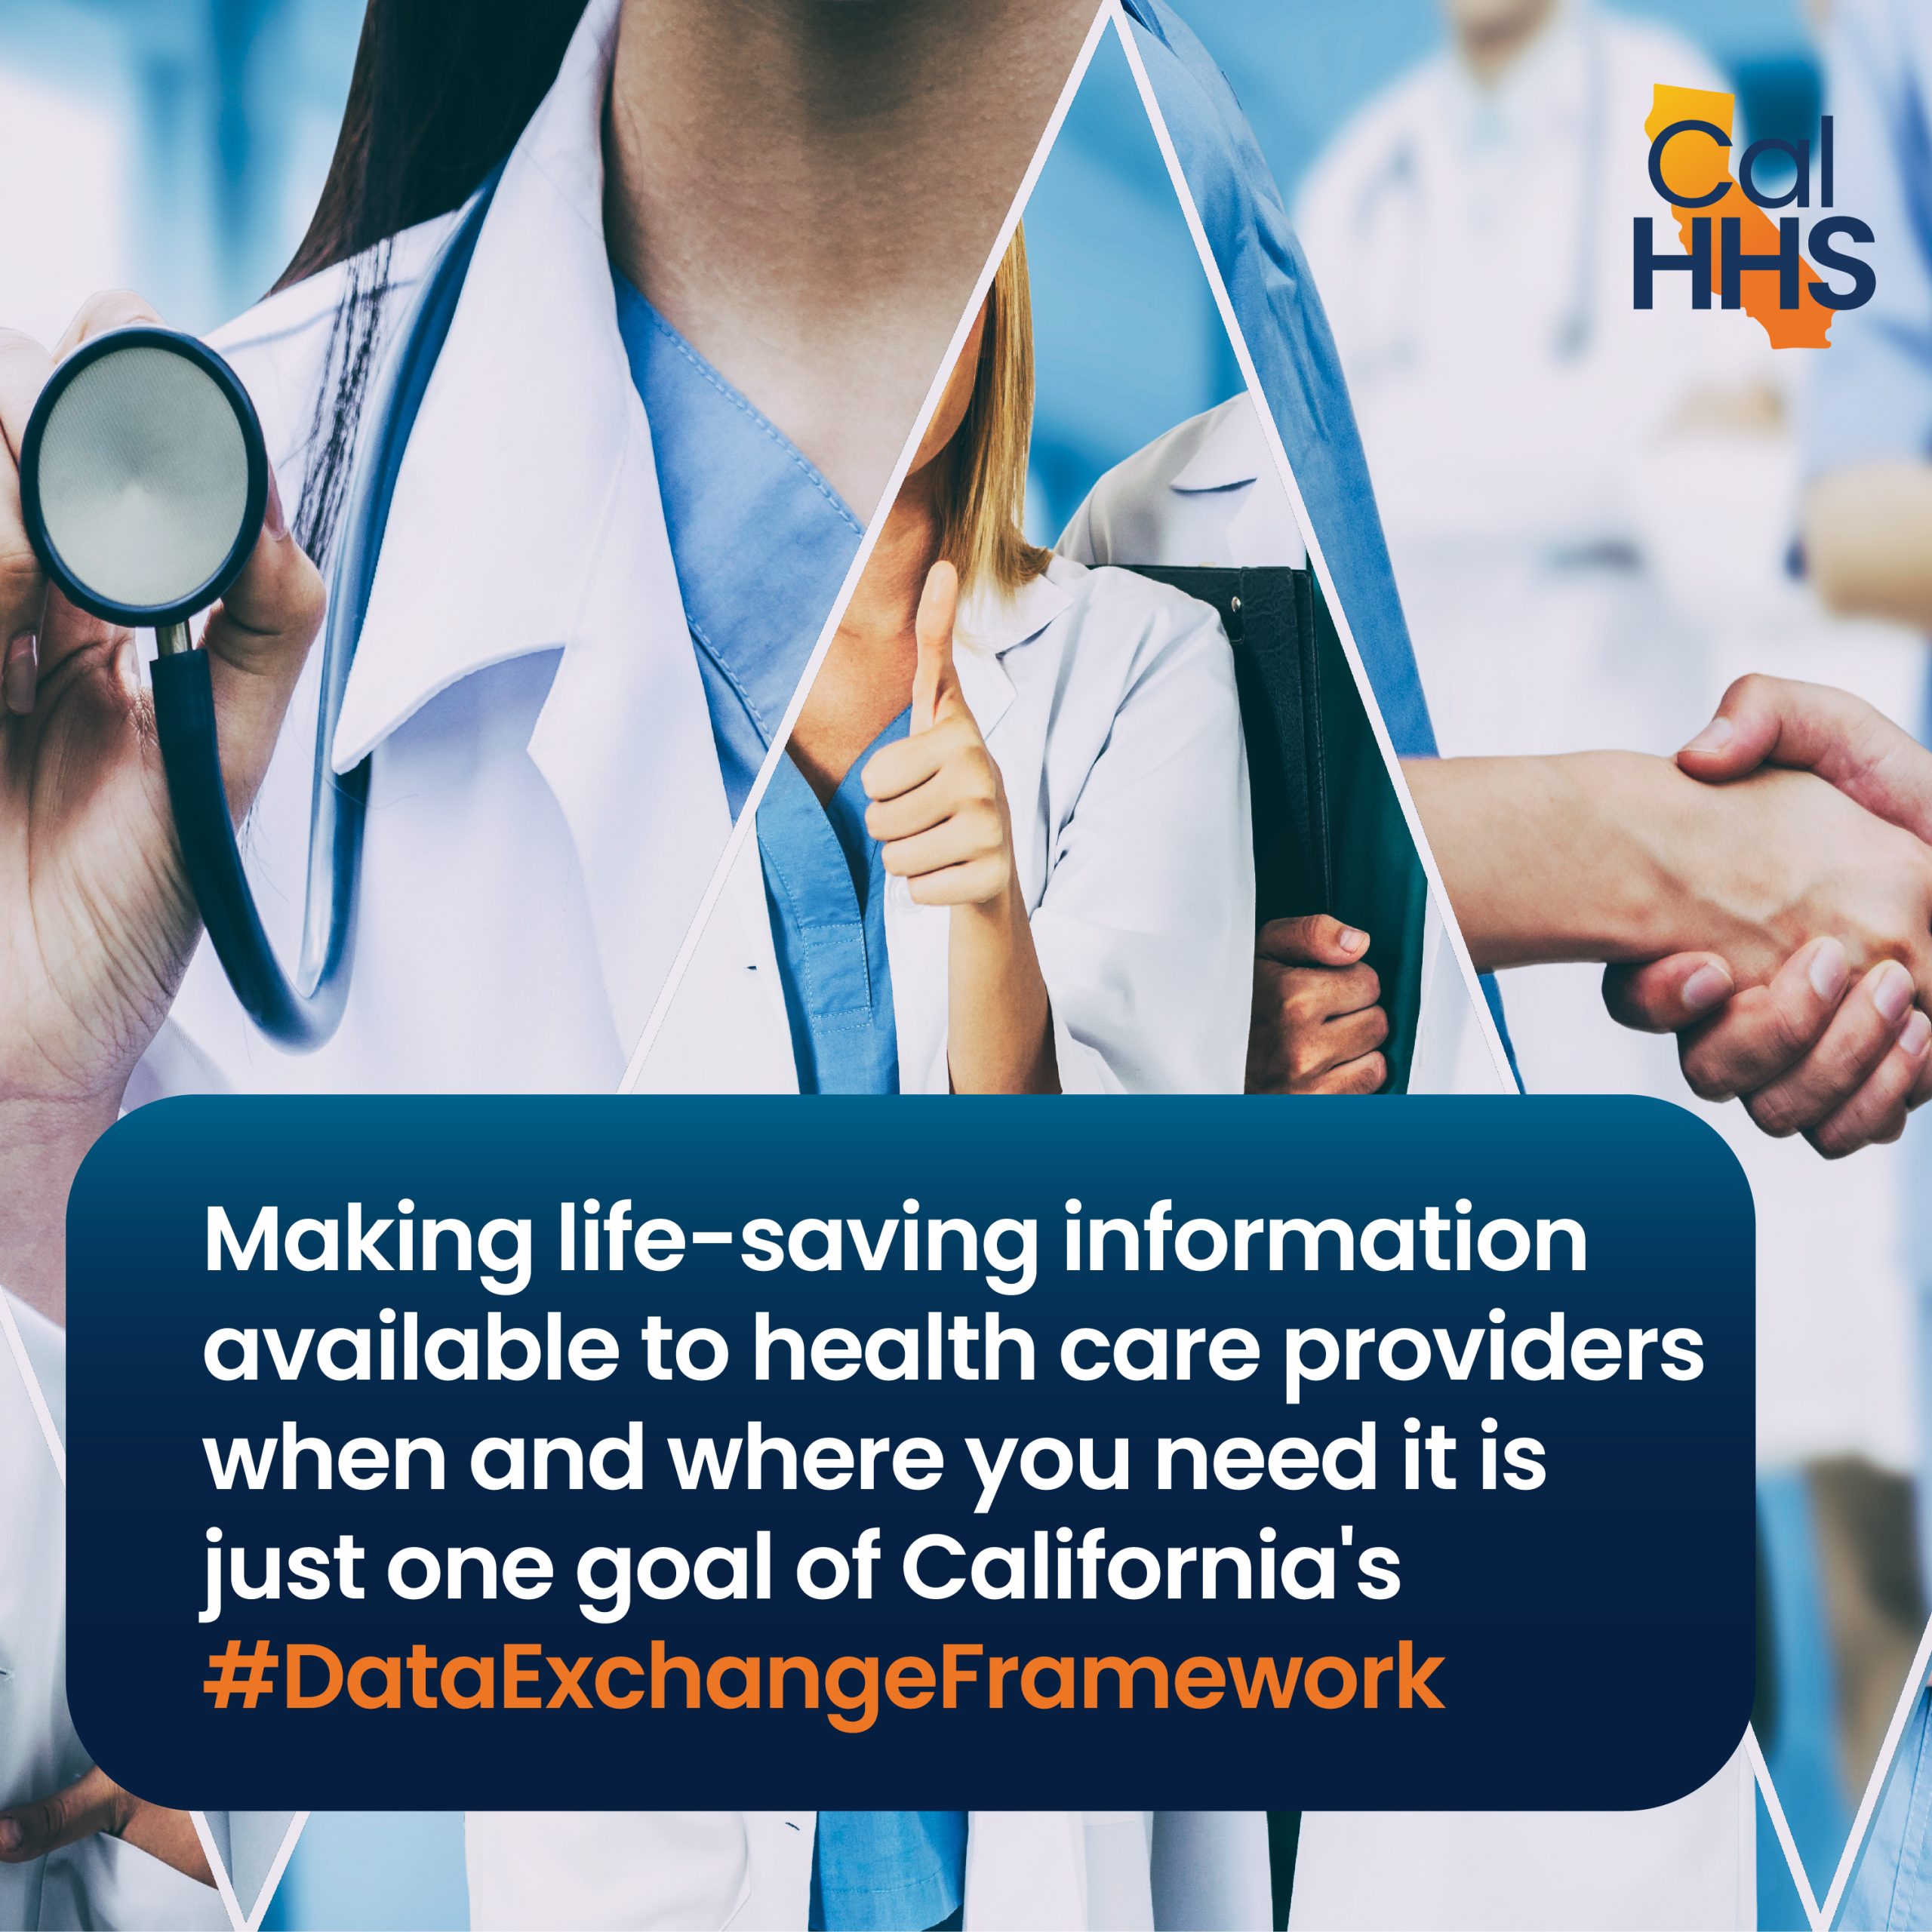 Making life-saving information available to health care providers when and where you need it is just one goal of California's #DataExchangeFramework